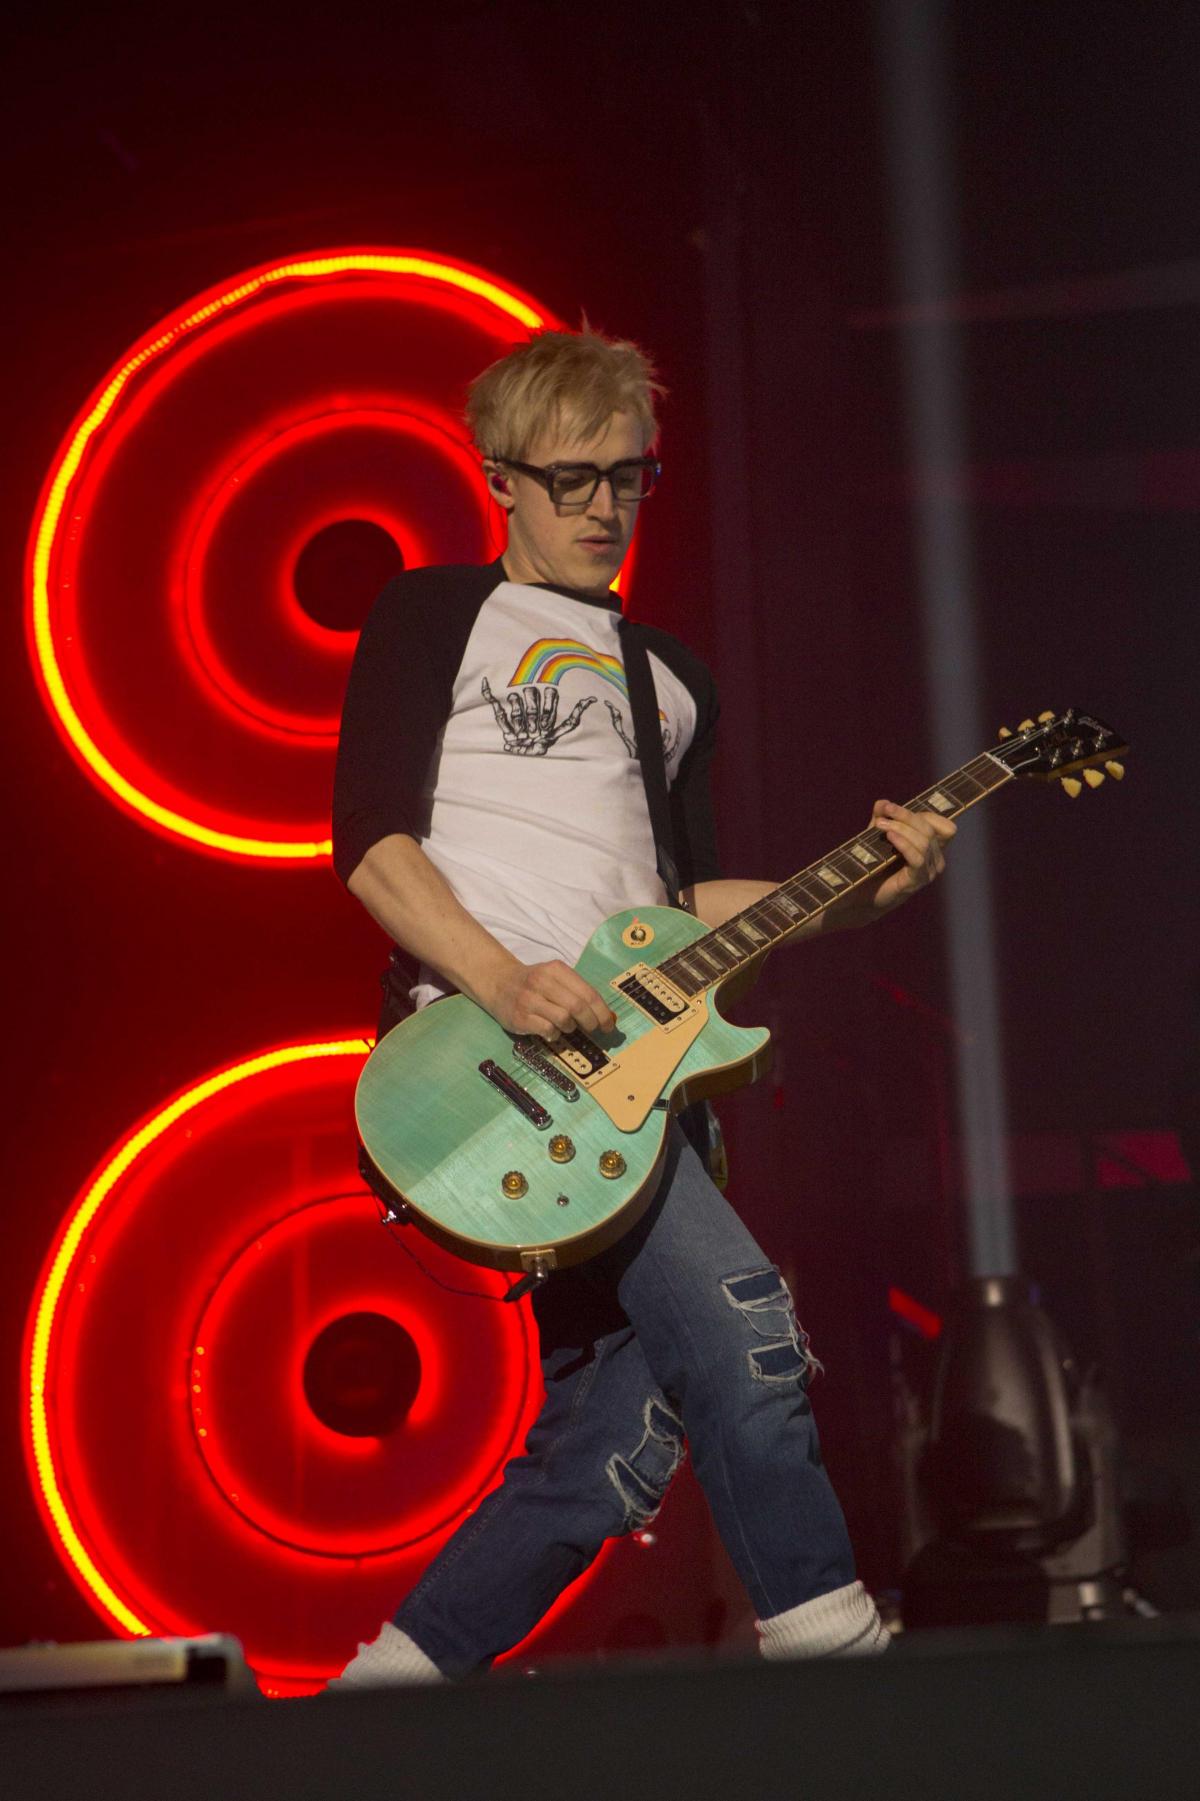 McBusted at the BIC. Pictures by www.rockstarimages.co.uk.